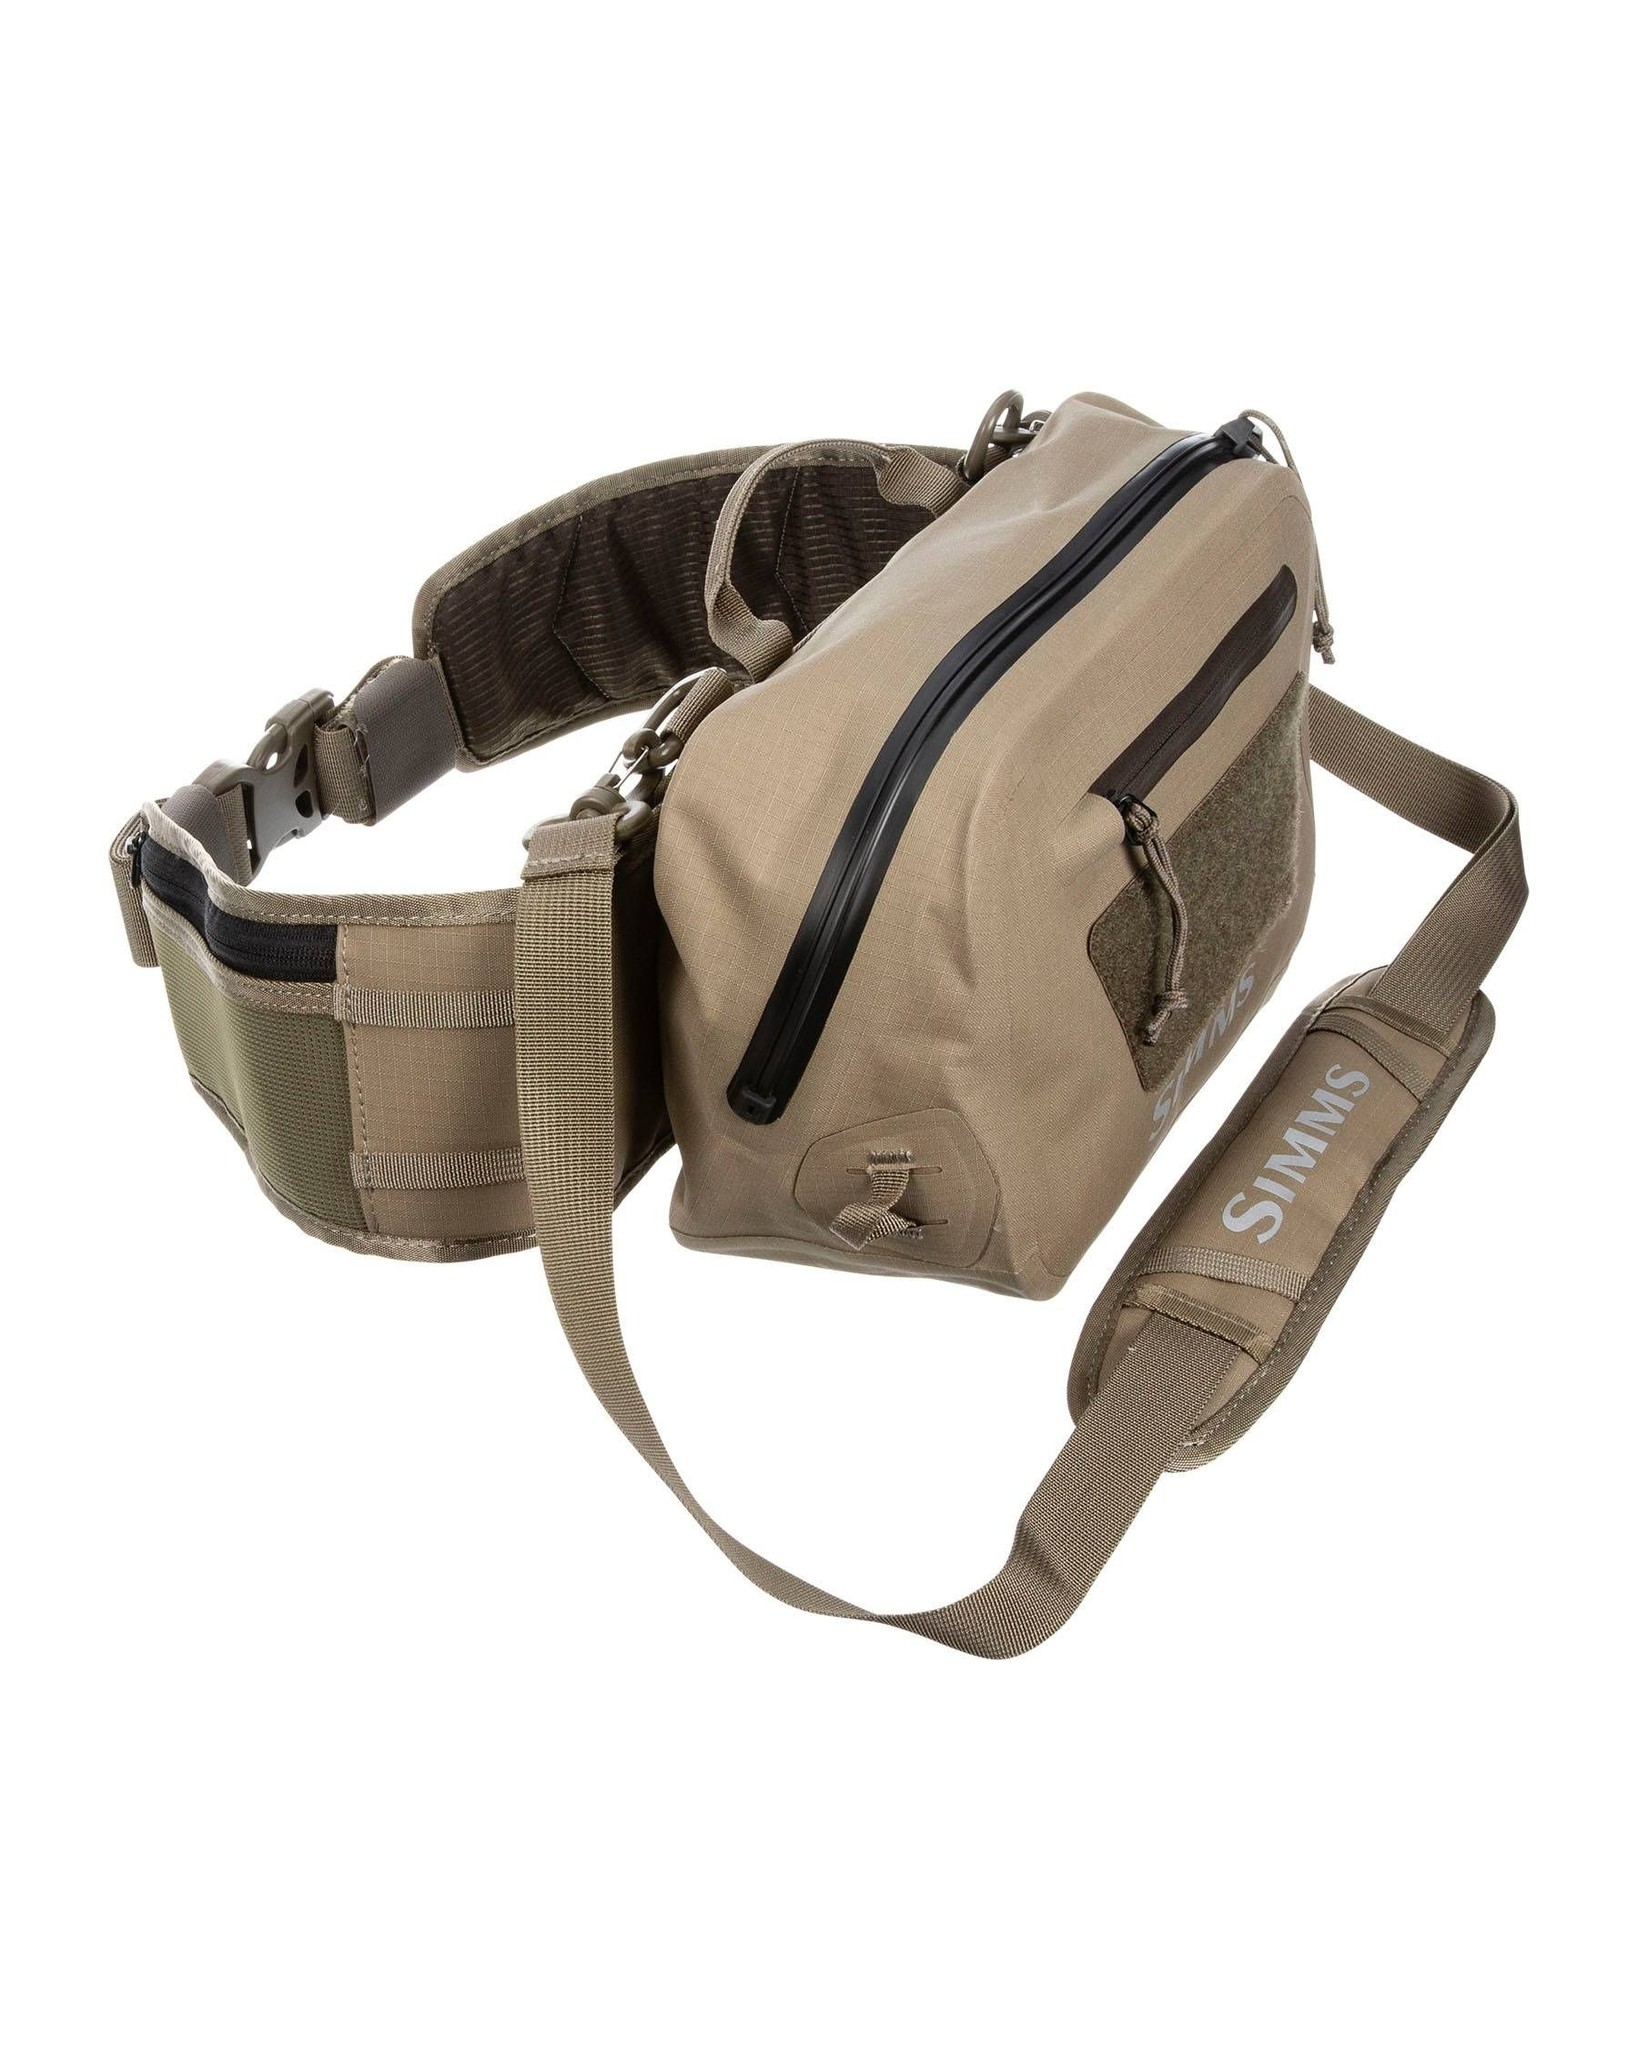 Simms Dry Creek Z Hip Pack 10L - Angler's Covey